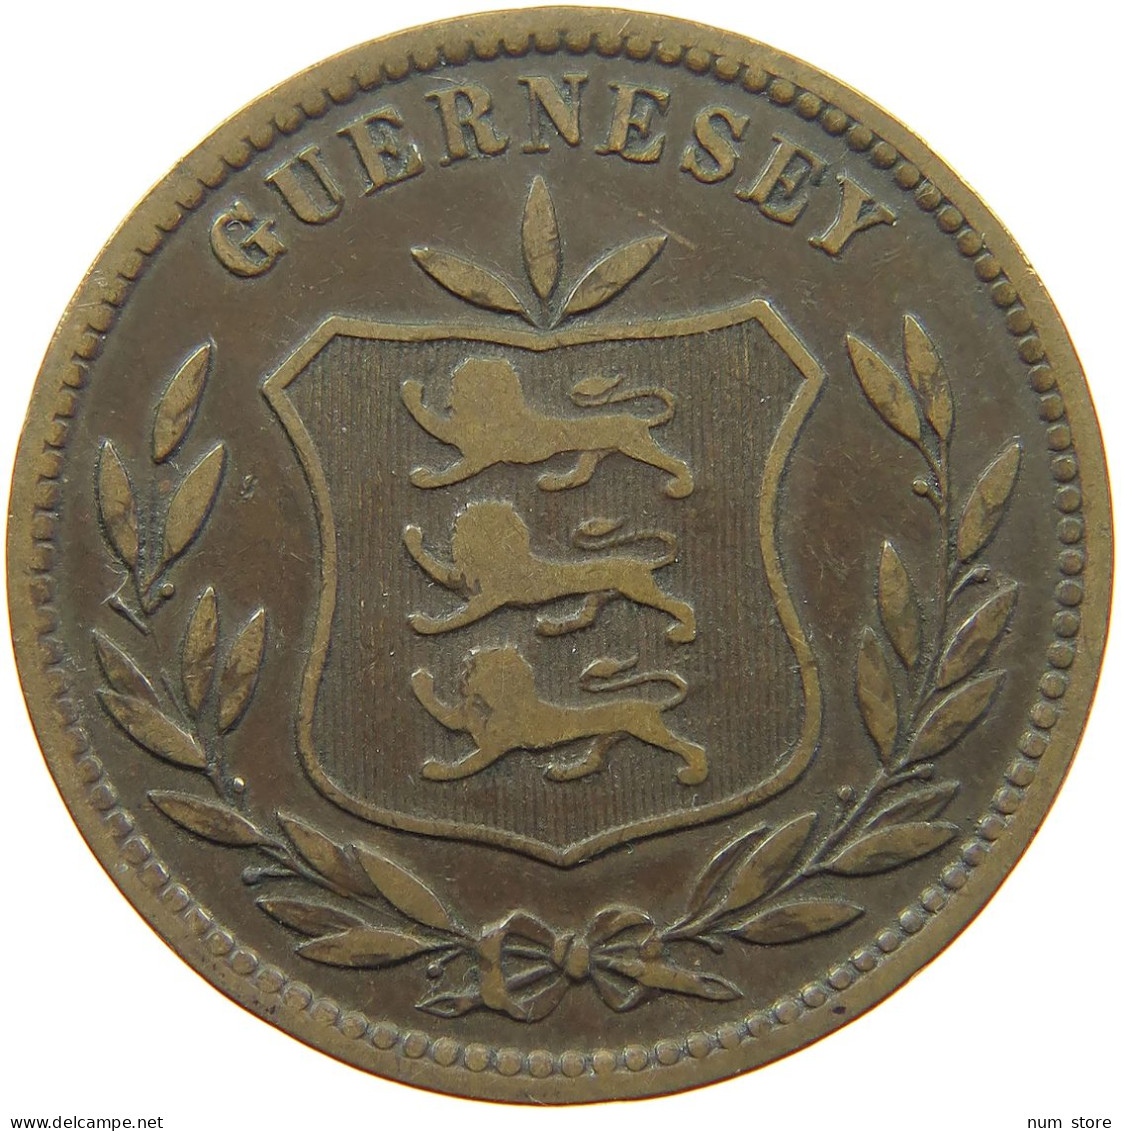 GUERNSEY 8 DOUBLES 1902 Edward VII., 1901 - 1910 #s021 0369 - Guernesey